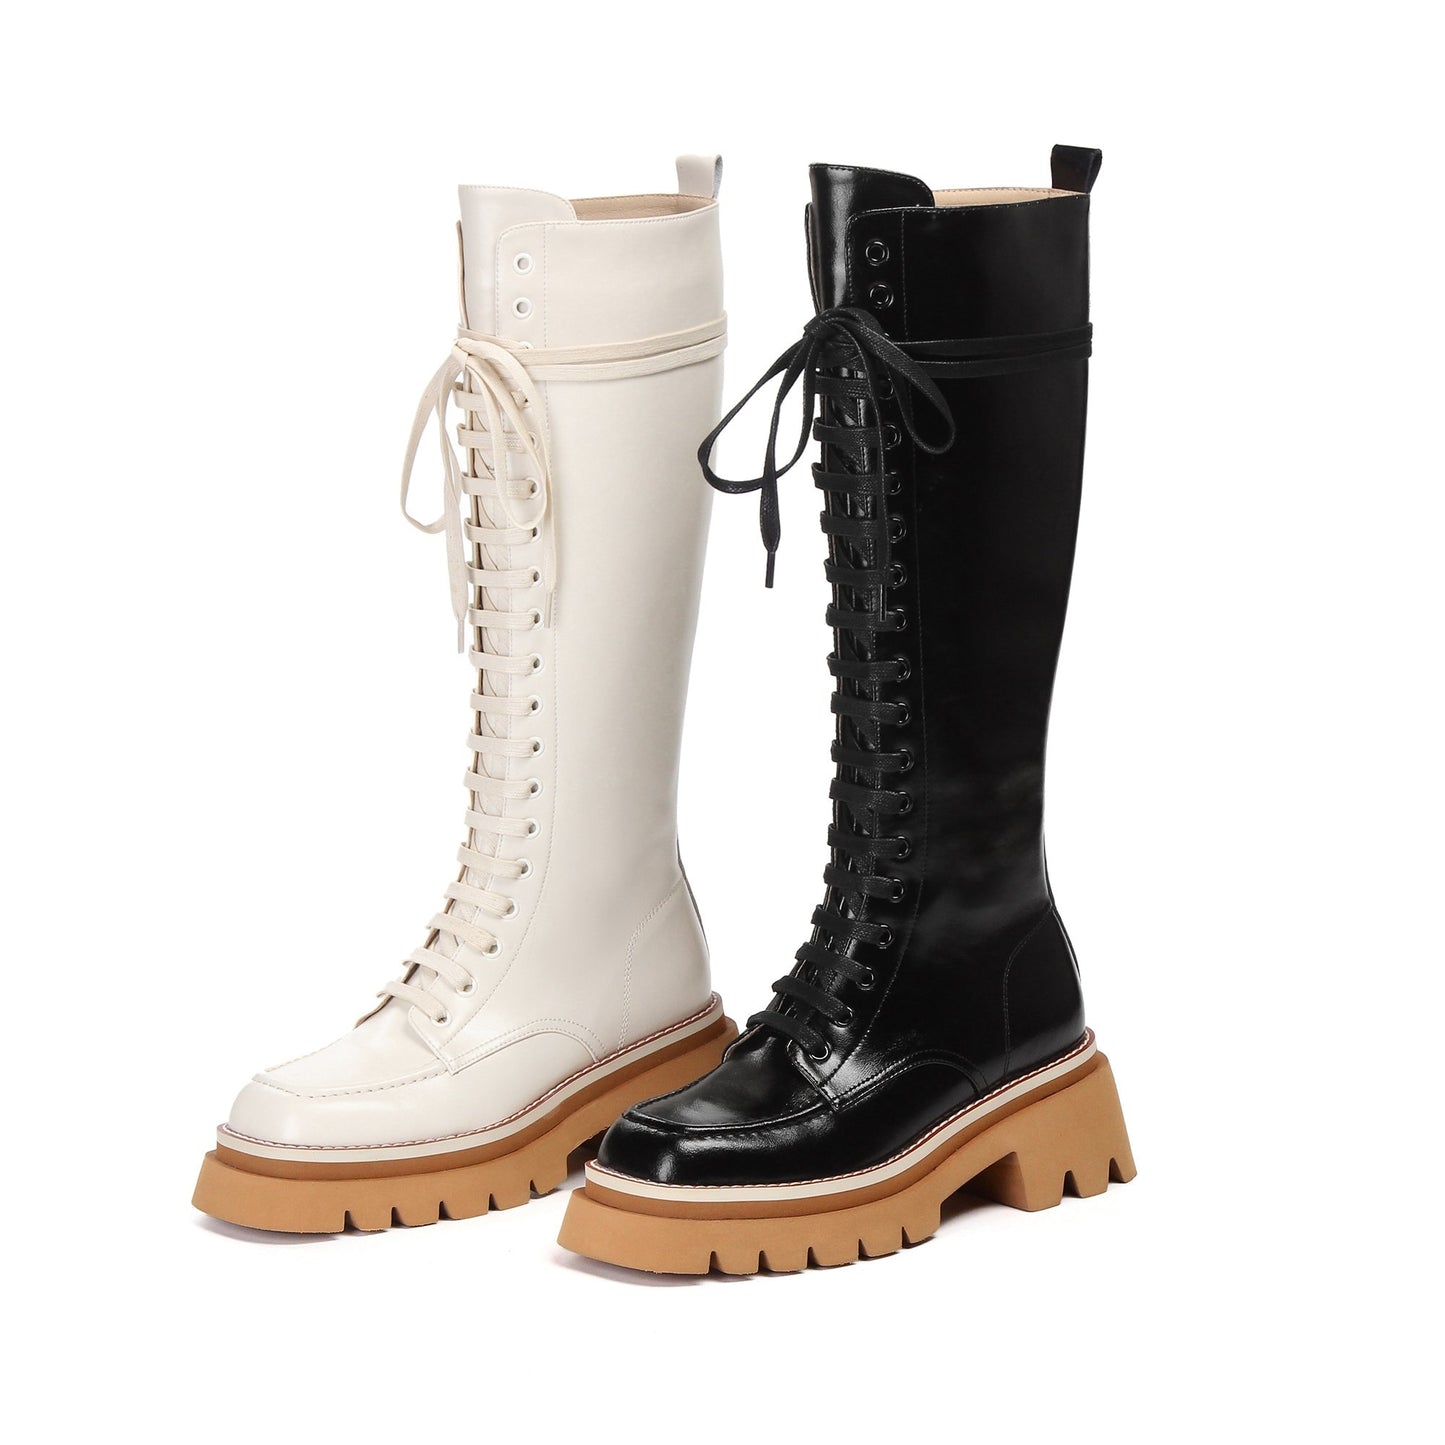 Leather Lace up Knee High Boots - Black or Cream